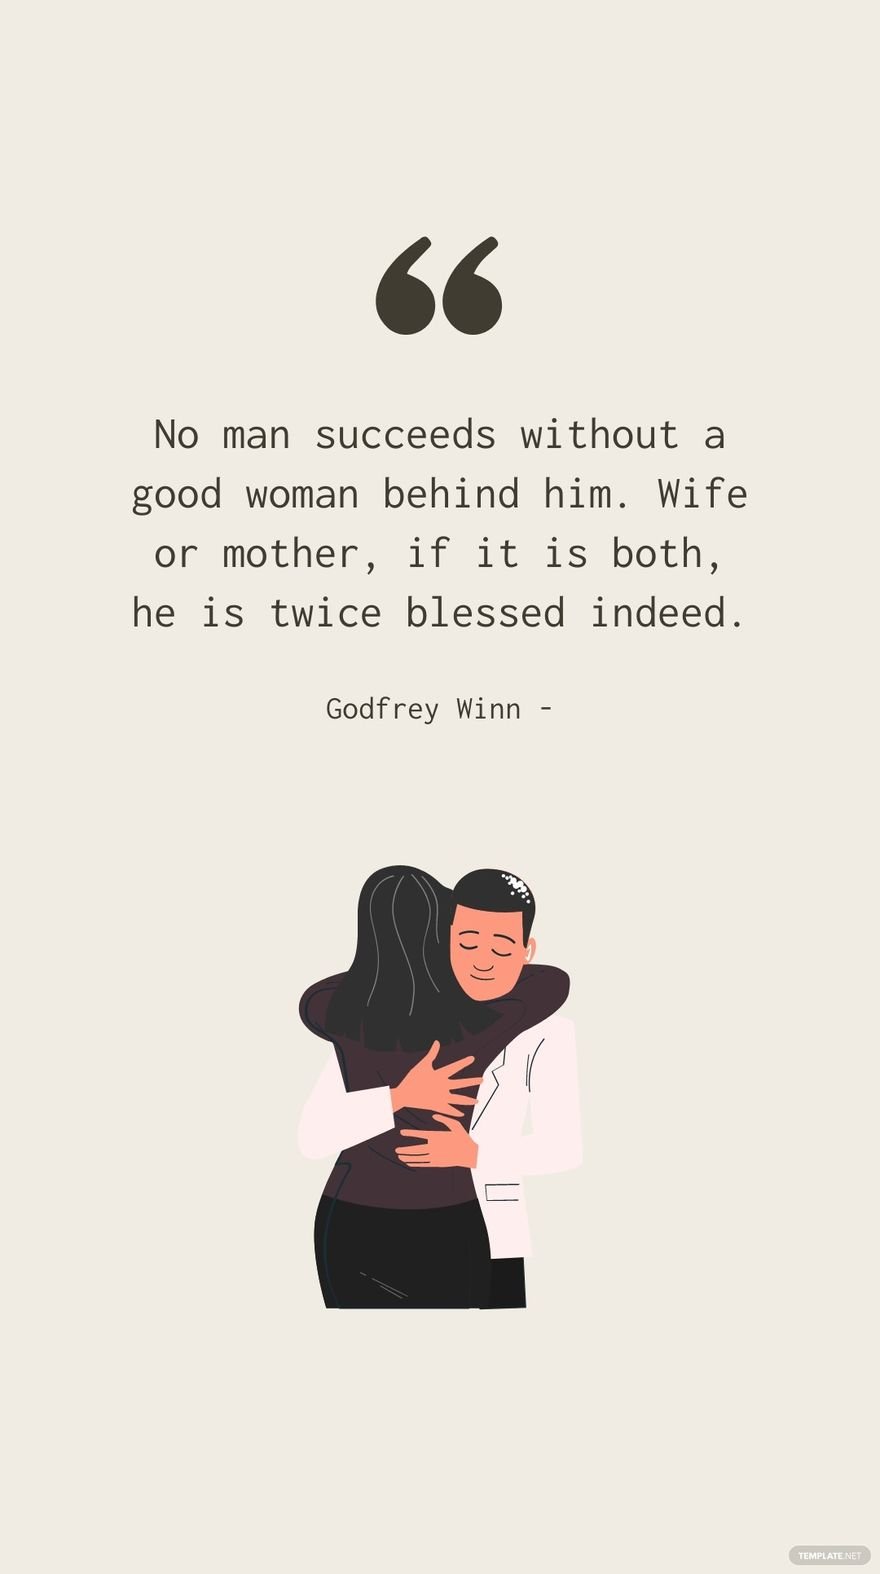 Godfrey Winn - No man succeeds without a good woman behind him. Wife or mother, if it is both, he is twice blessed indeed.